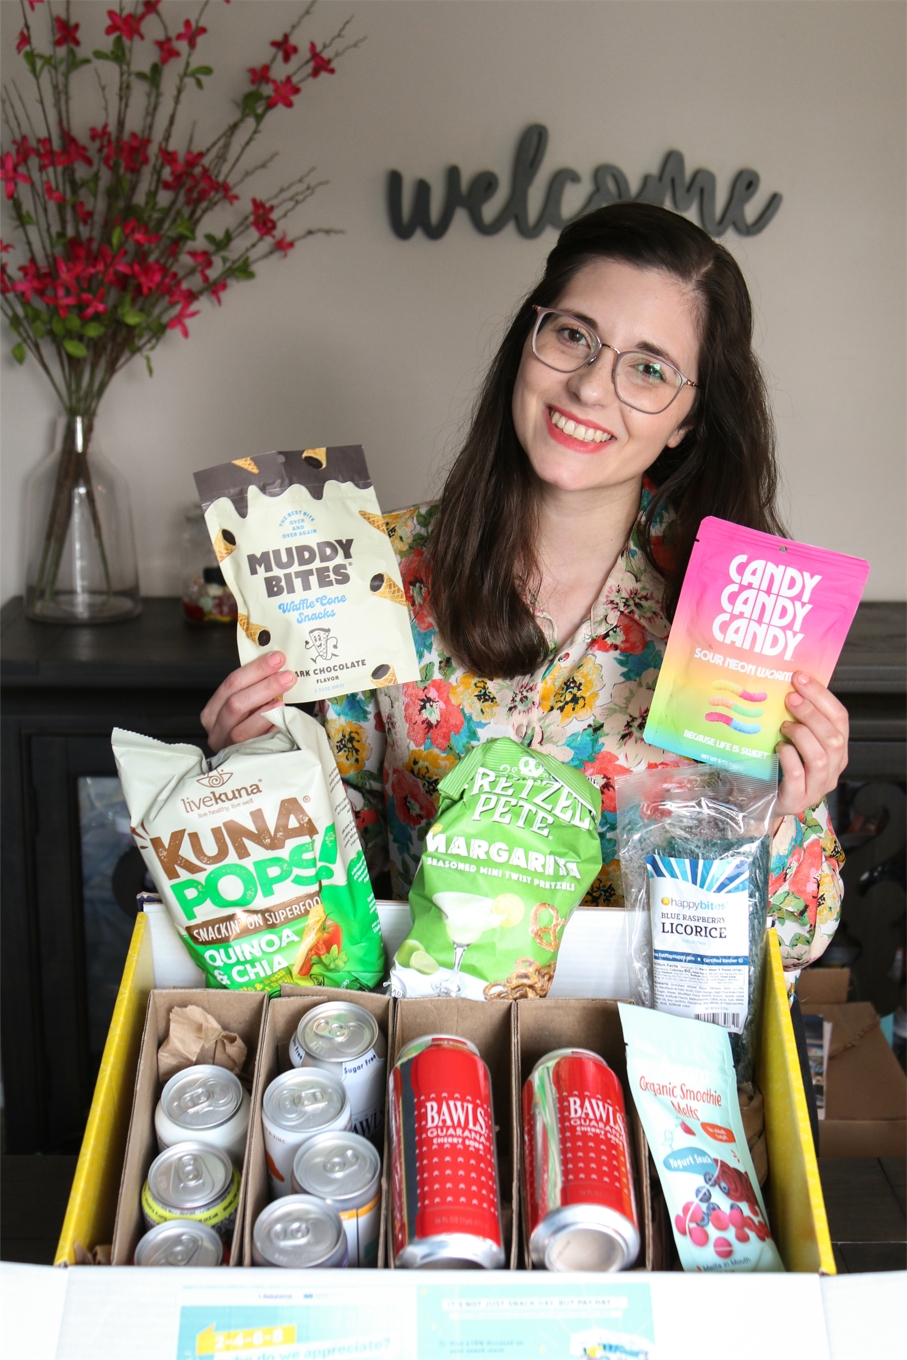 Our colleague poses with her snack box from Colleague Appreciation Month.